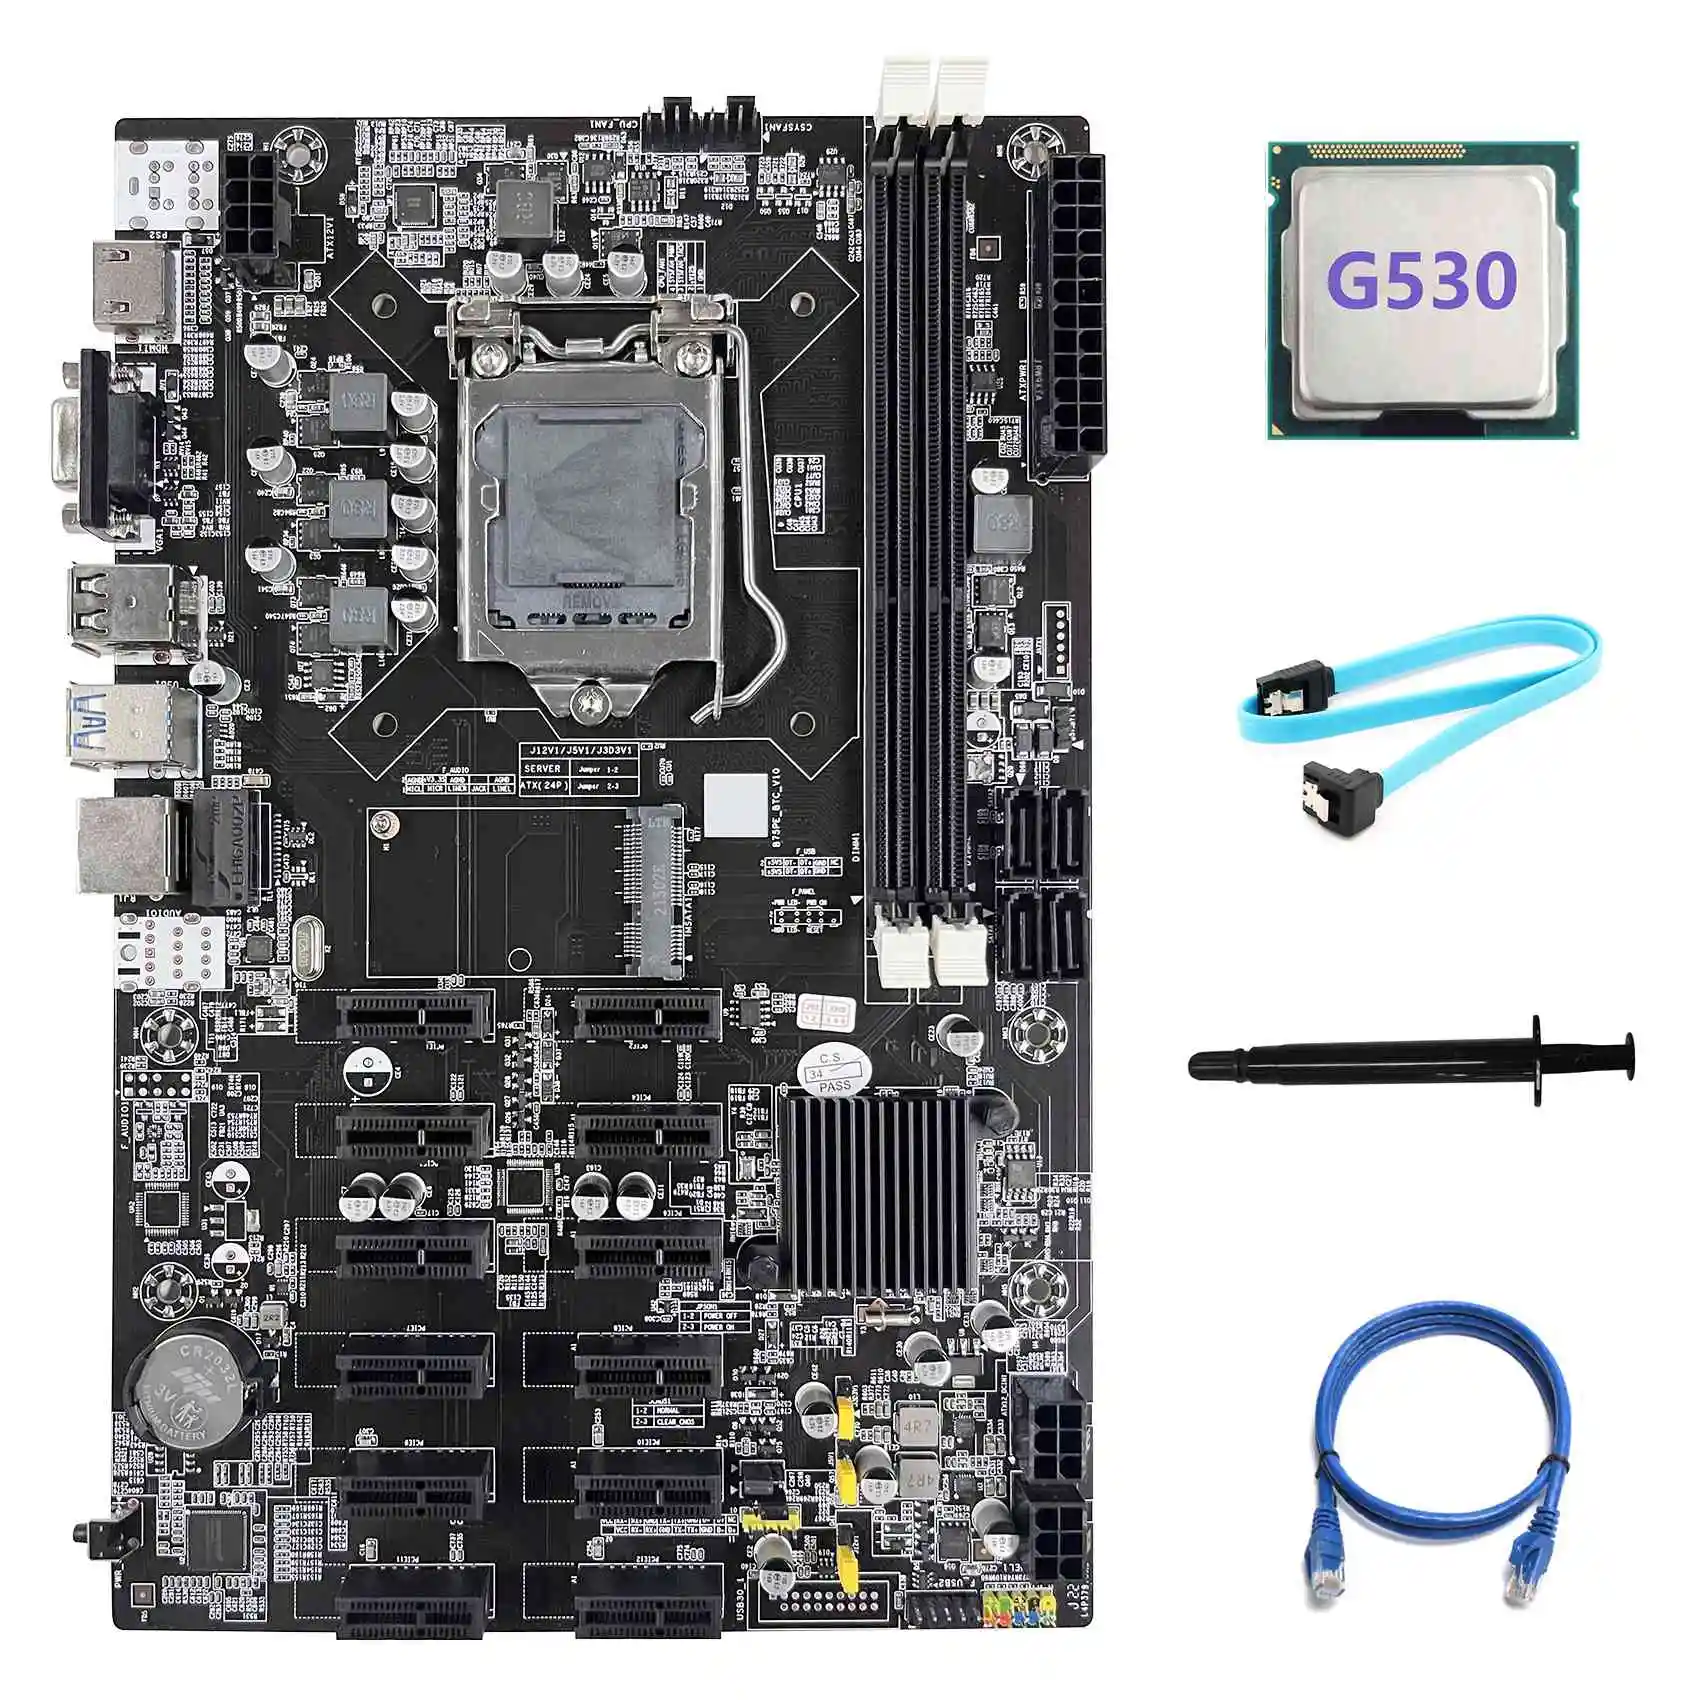 

B75 12 PCIE ETH Mining Motherboard LGA1155 Motherboard+G530 CPU+SATA Cable+RJ45 Network Cable+Thermal Grease